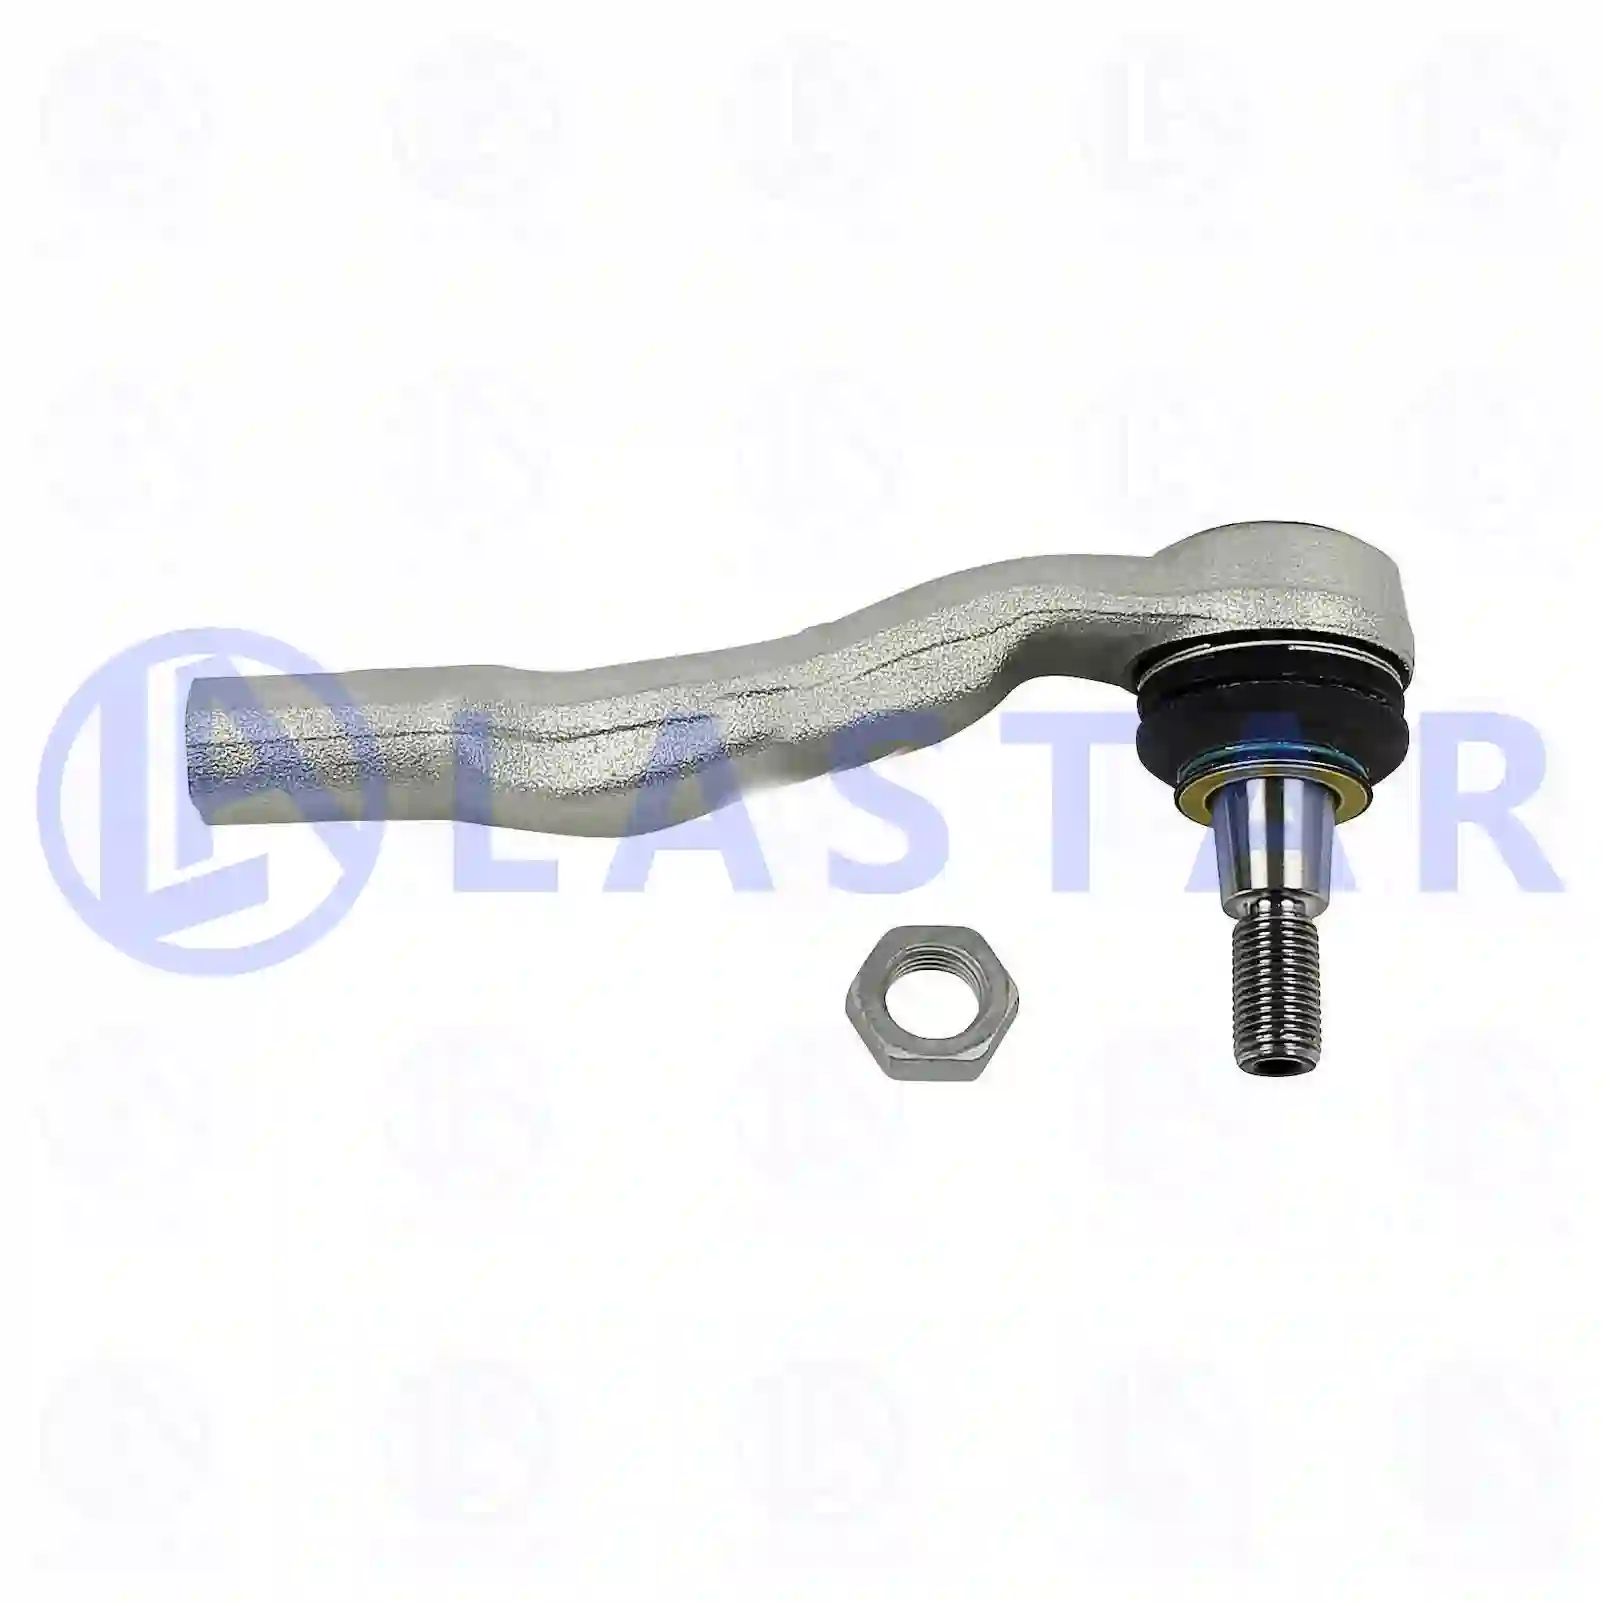 Ball joint, left, 77705491, 6394600048, 6394600448, 6394600648 ||  77705491 Lastar Spare Part | Truck Spare Parts, Auotomotive Spare Parts Ball joint, left, 77705491, 6394600048, 6394600448, 6394600648 ||  77705491 Lastar Spare Part | Truck Spare Parts, Auotomotive Spare Parts